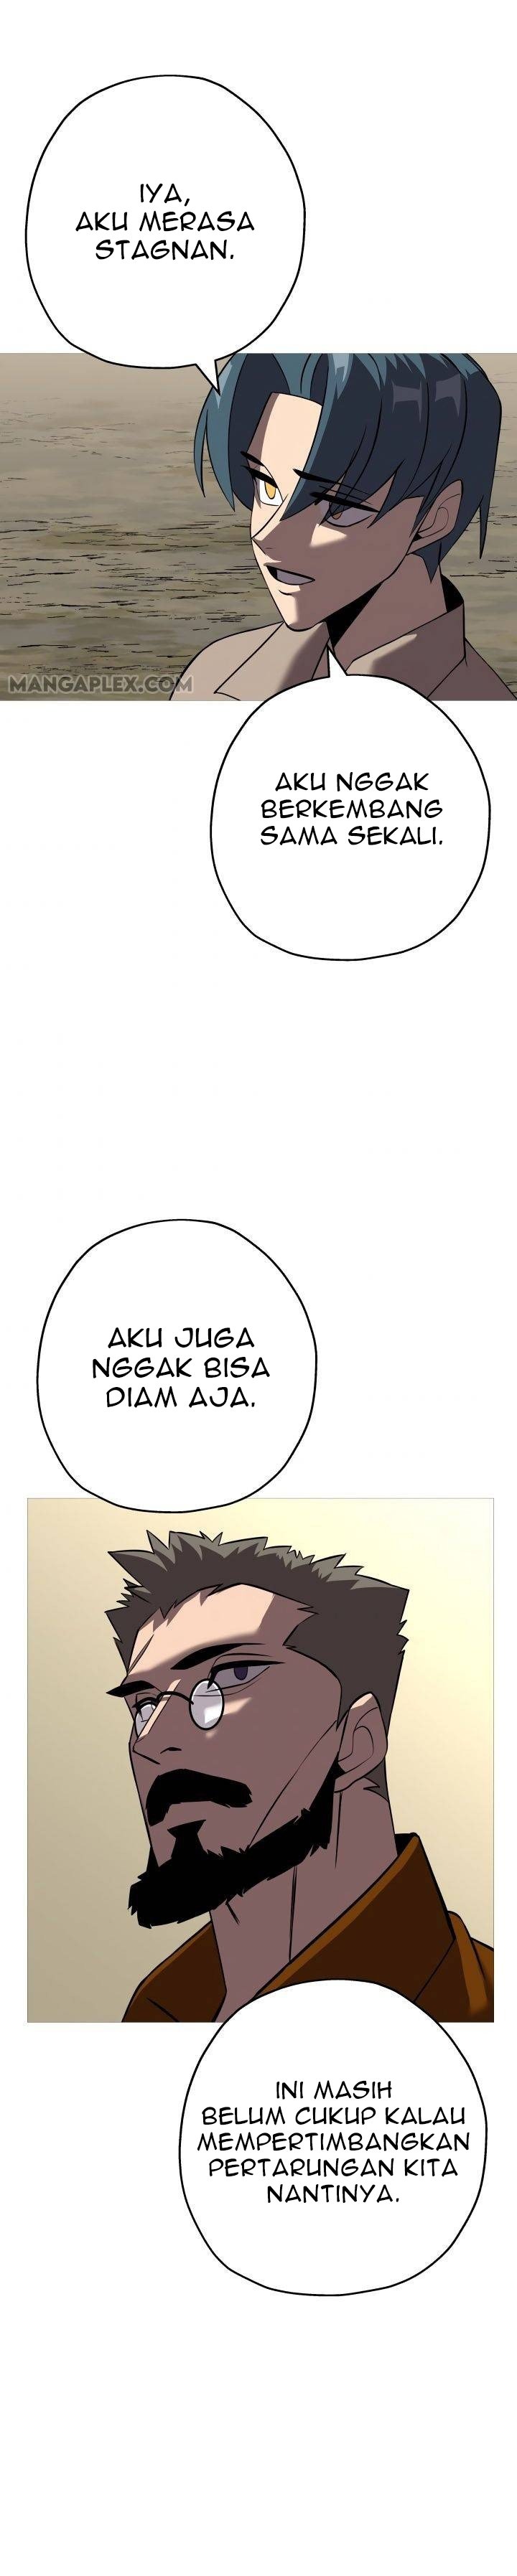 Dilarang COPAS - situs resmi www.mangacanblog.com - Komik the story of a low rank soldier becoming a monarch 061 - chapter 61 62 Indonesia the story of a low rank soldier becoming a monarch 061 - chapter 61 Terbaru 11|Baca Manga Komik Indonesia|Mangacan